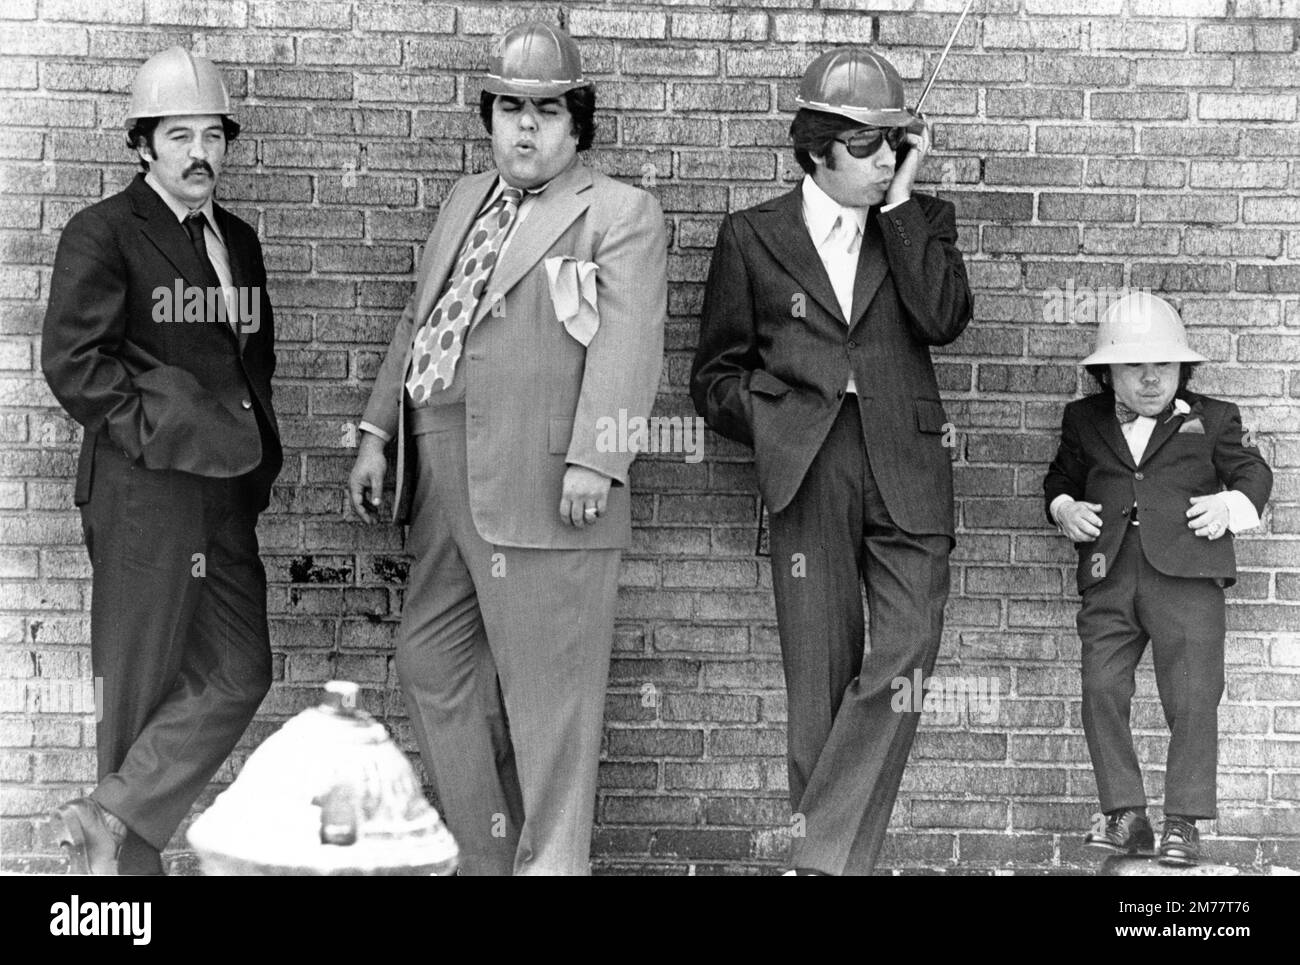 JOE SANTOS IRVING SELBST JERRY ORBACH and HERVE VILLECHAIZE in THE GANG THAT COULDN'T SHOOT STRAIGHT 1971 director JAMES GOLDSTONE novel Jimmy Breslin screenplay Waldo Salt music Dave Grusin producers Robert Chartoff and Irwin Winkler Metro Goldwyn Mayer (MGM) Stock Photo